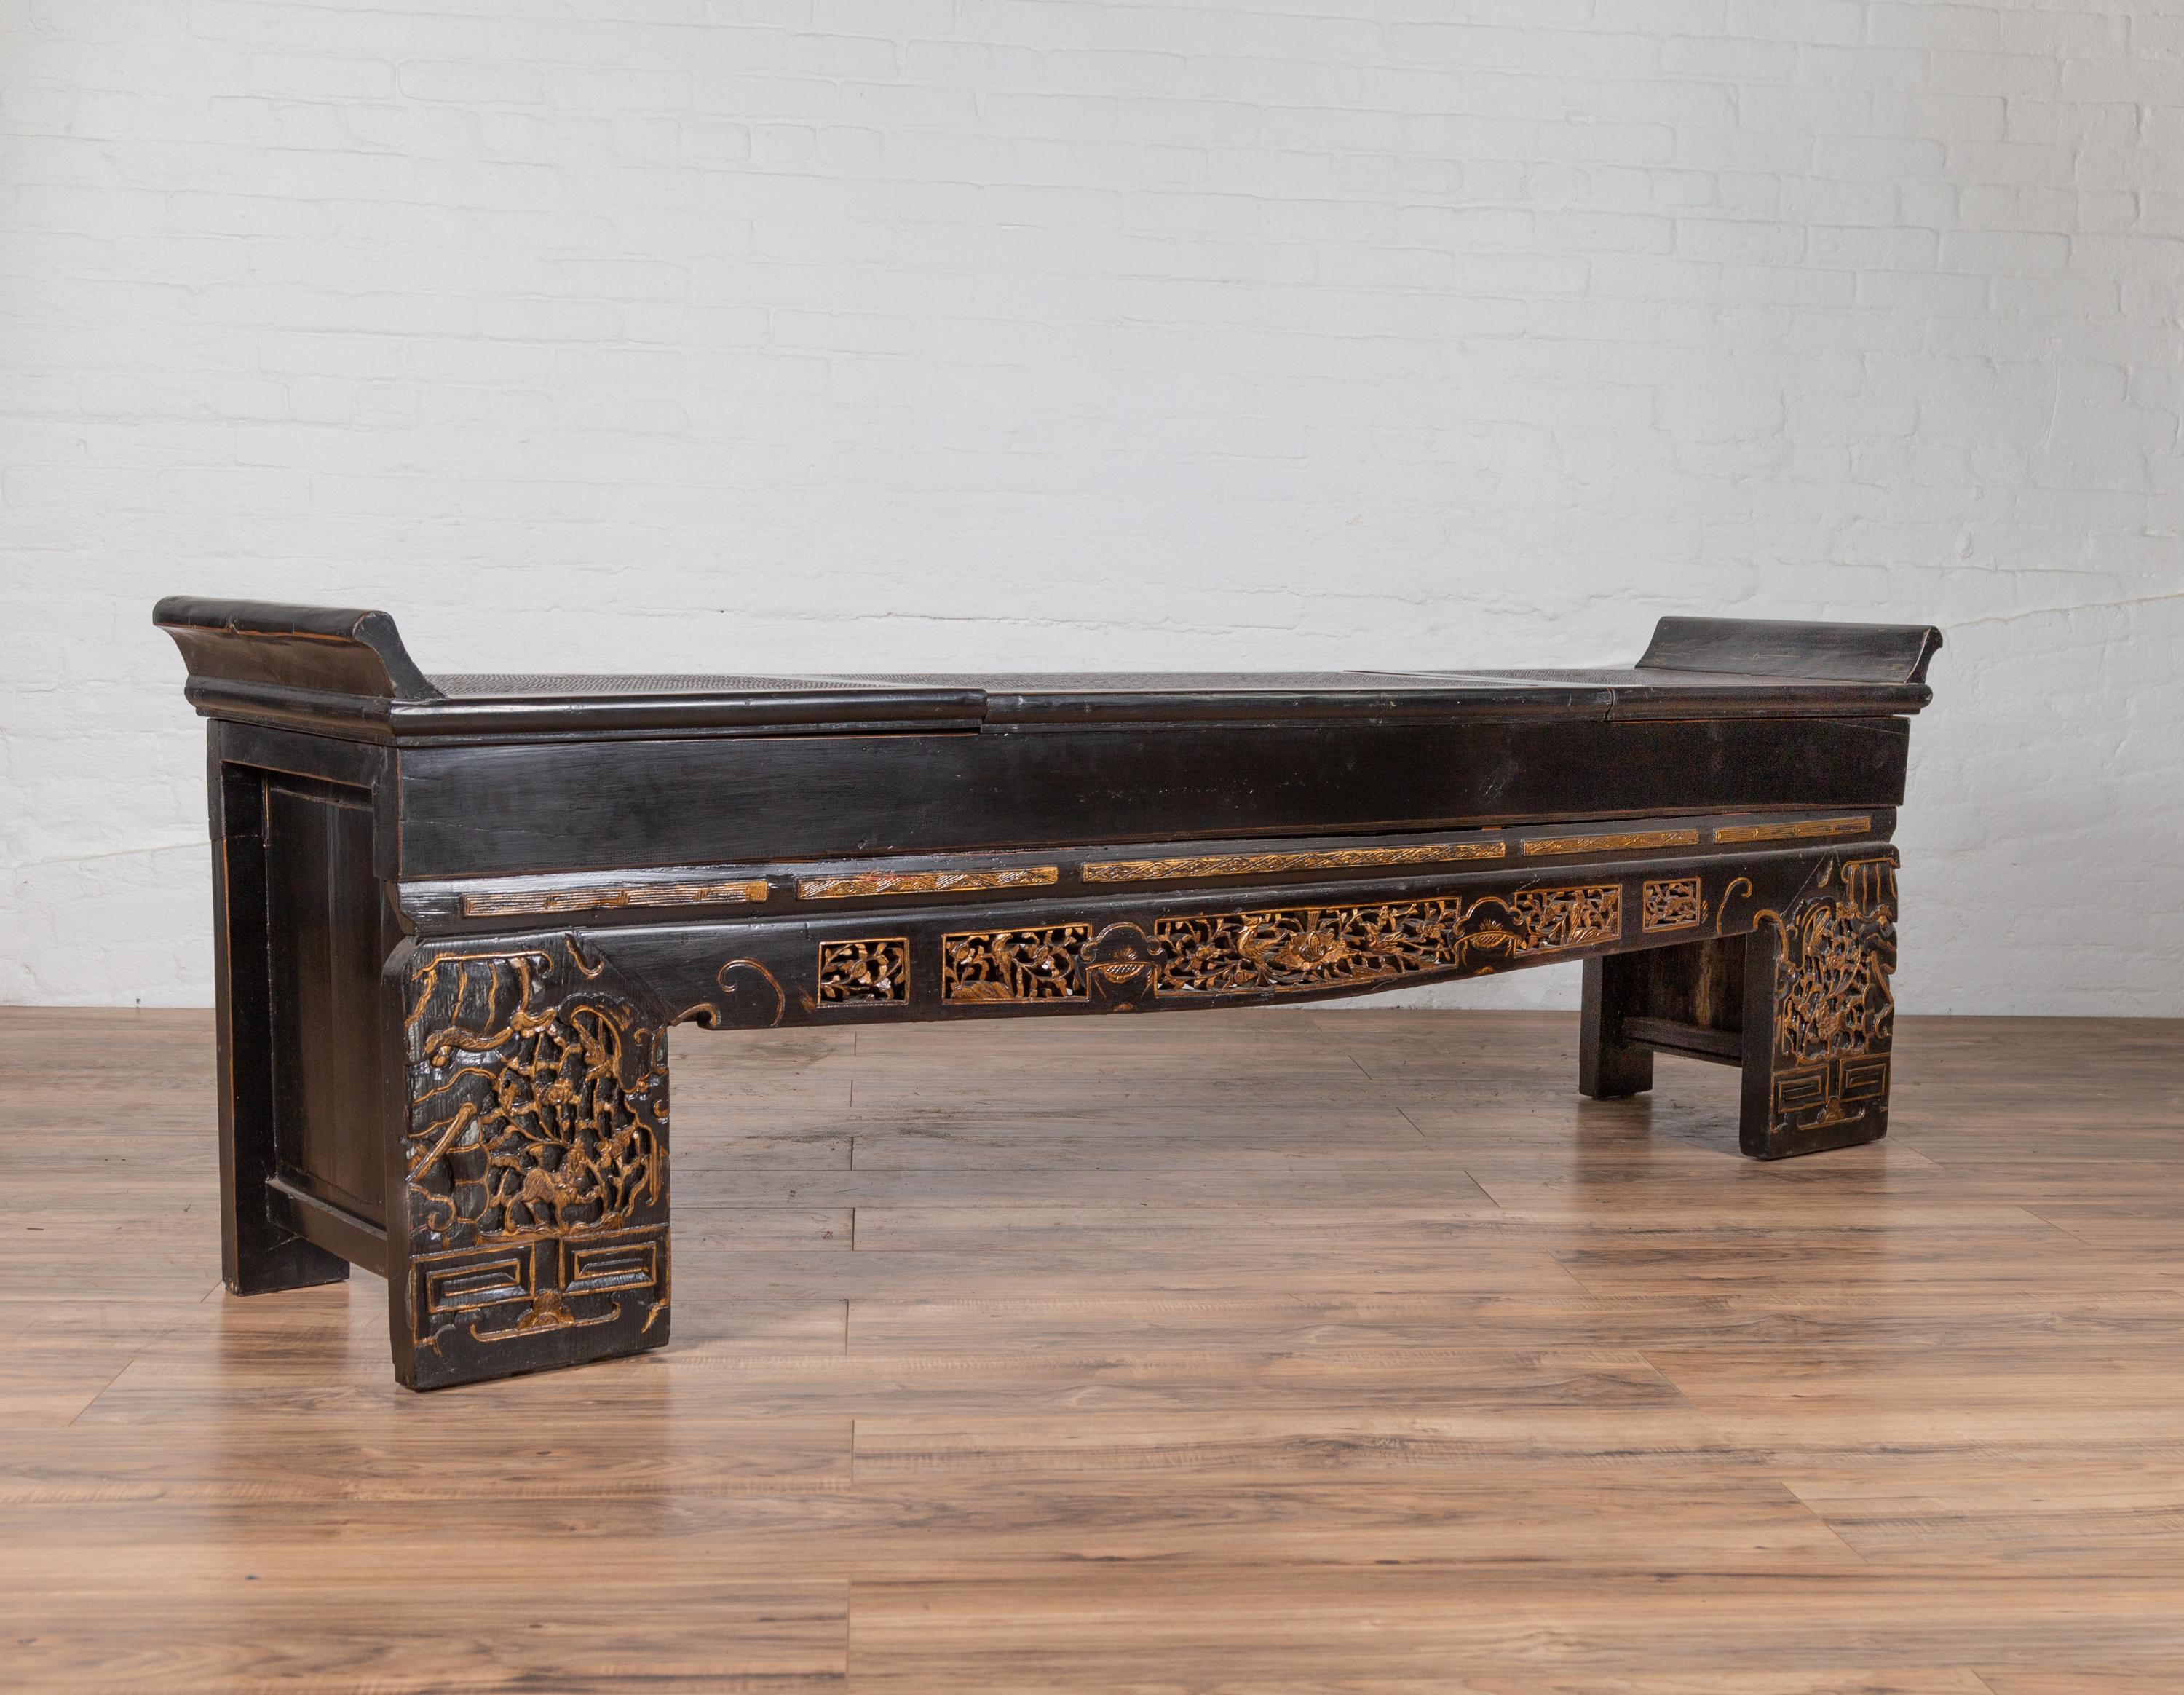 Antique Chinese Black Lacquered Bench with Hidden Storage, Rattan and Gilt Décor 4